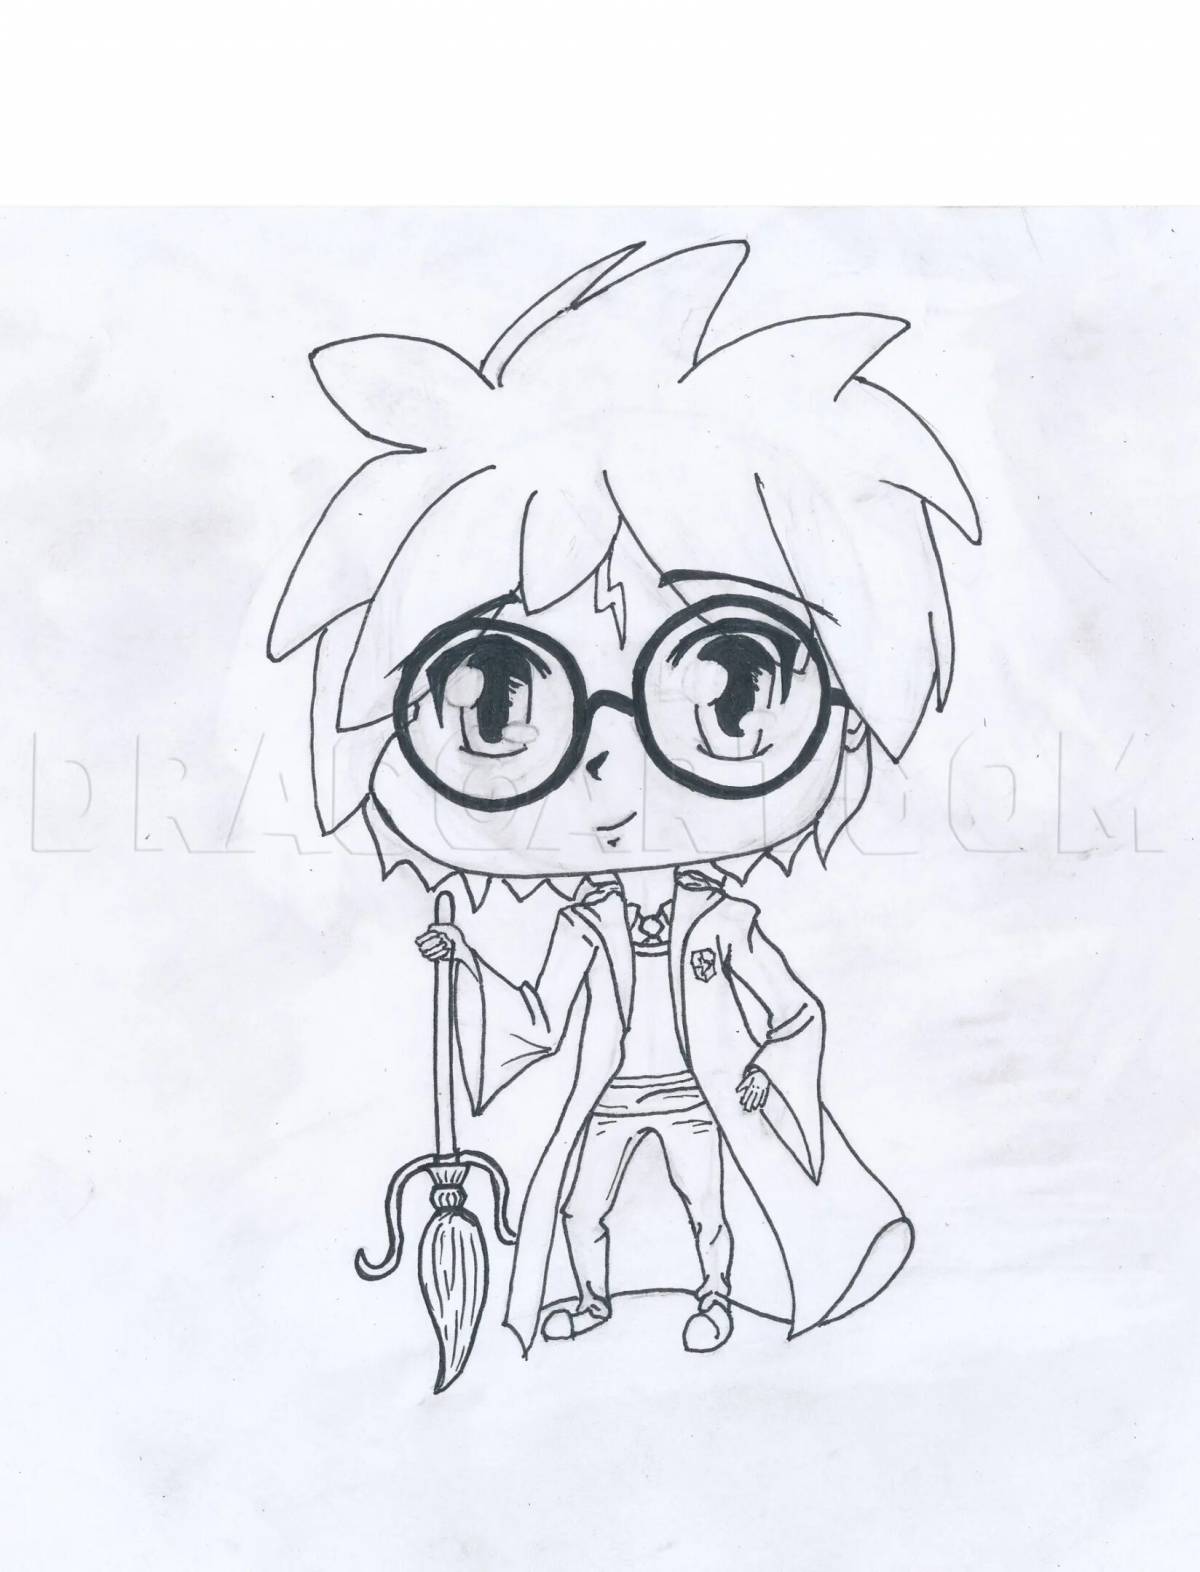 Harry potter anime comic coloring book